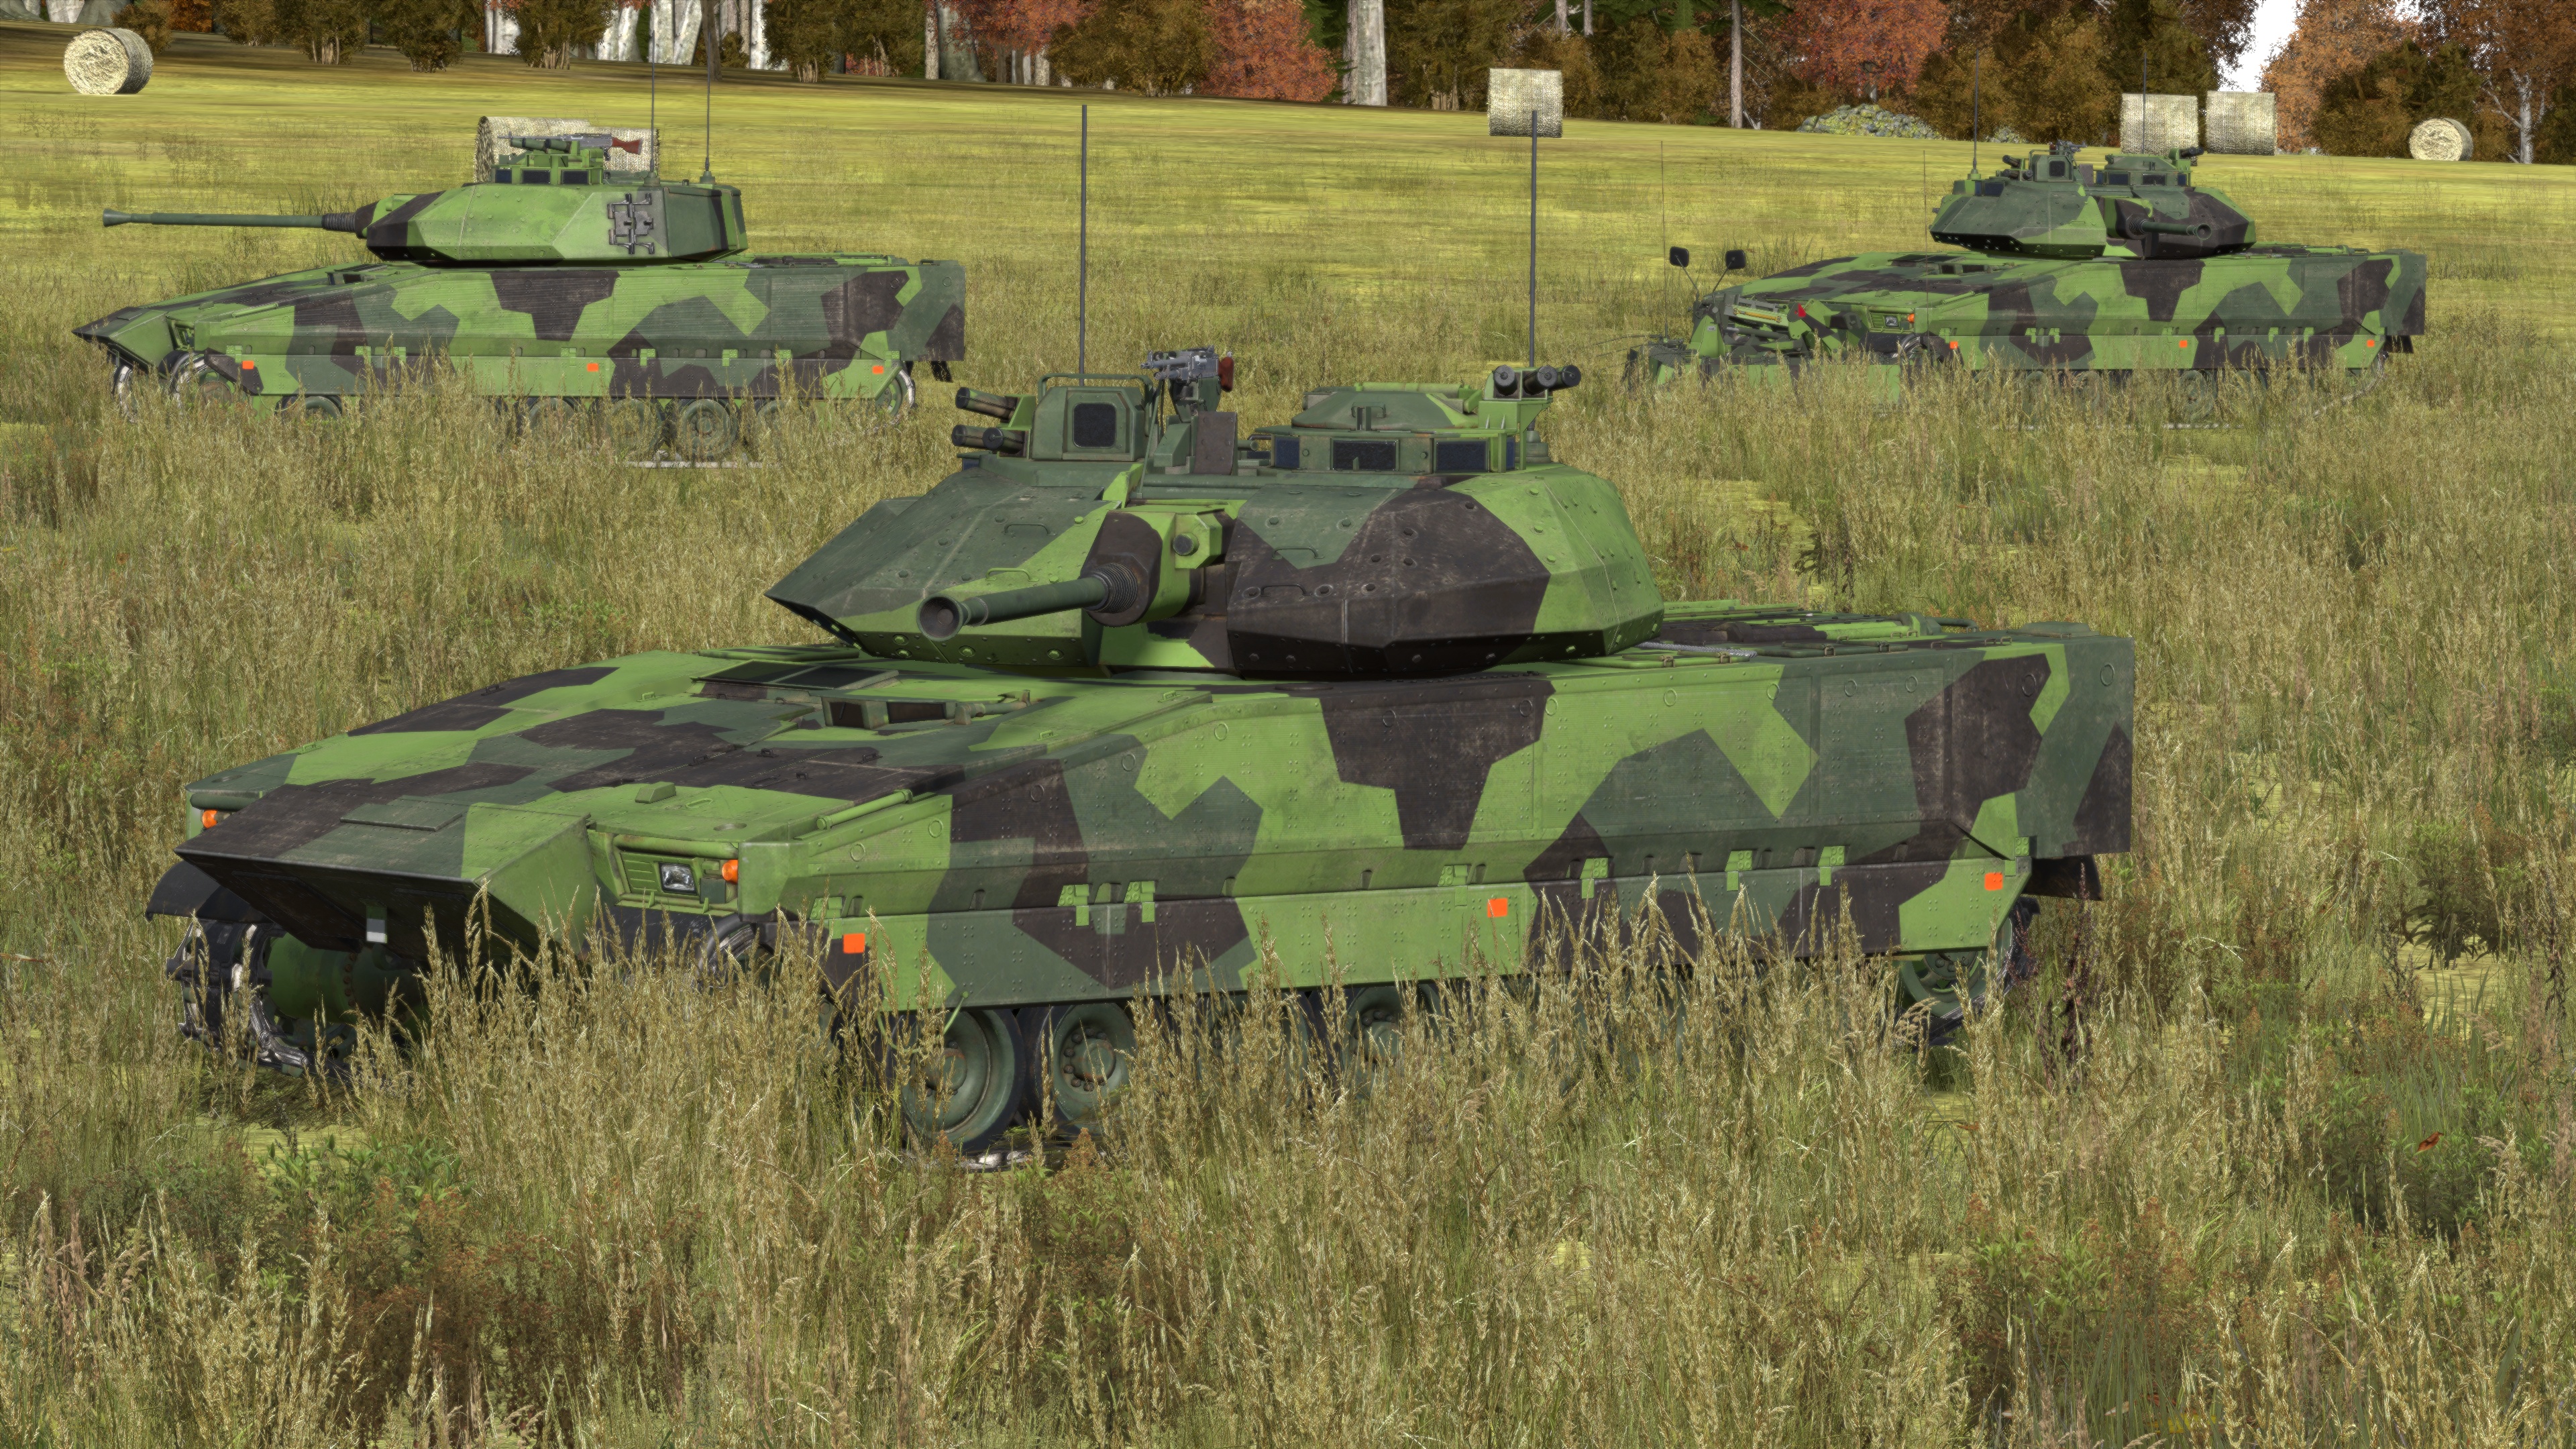 CV9040 in VBS3 for gunner, driver and commander training and simulation